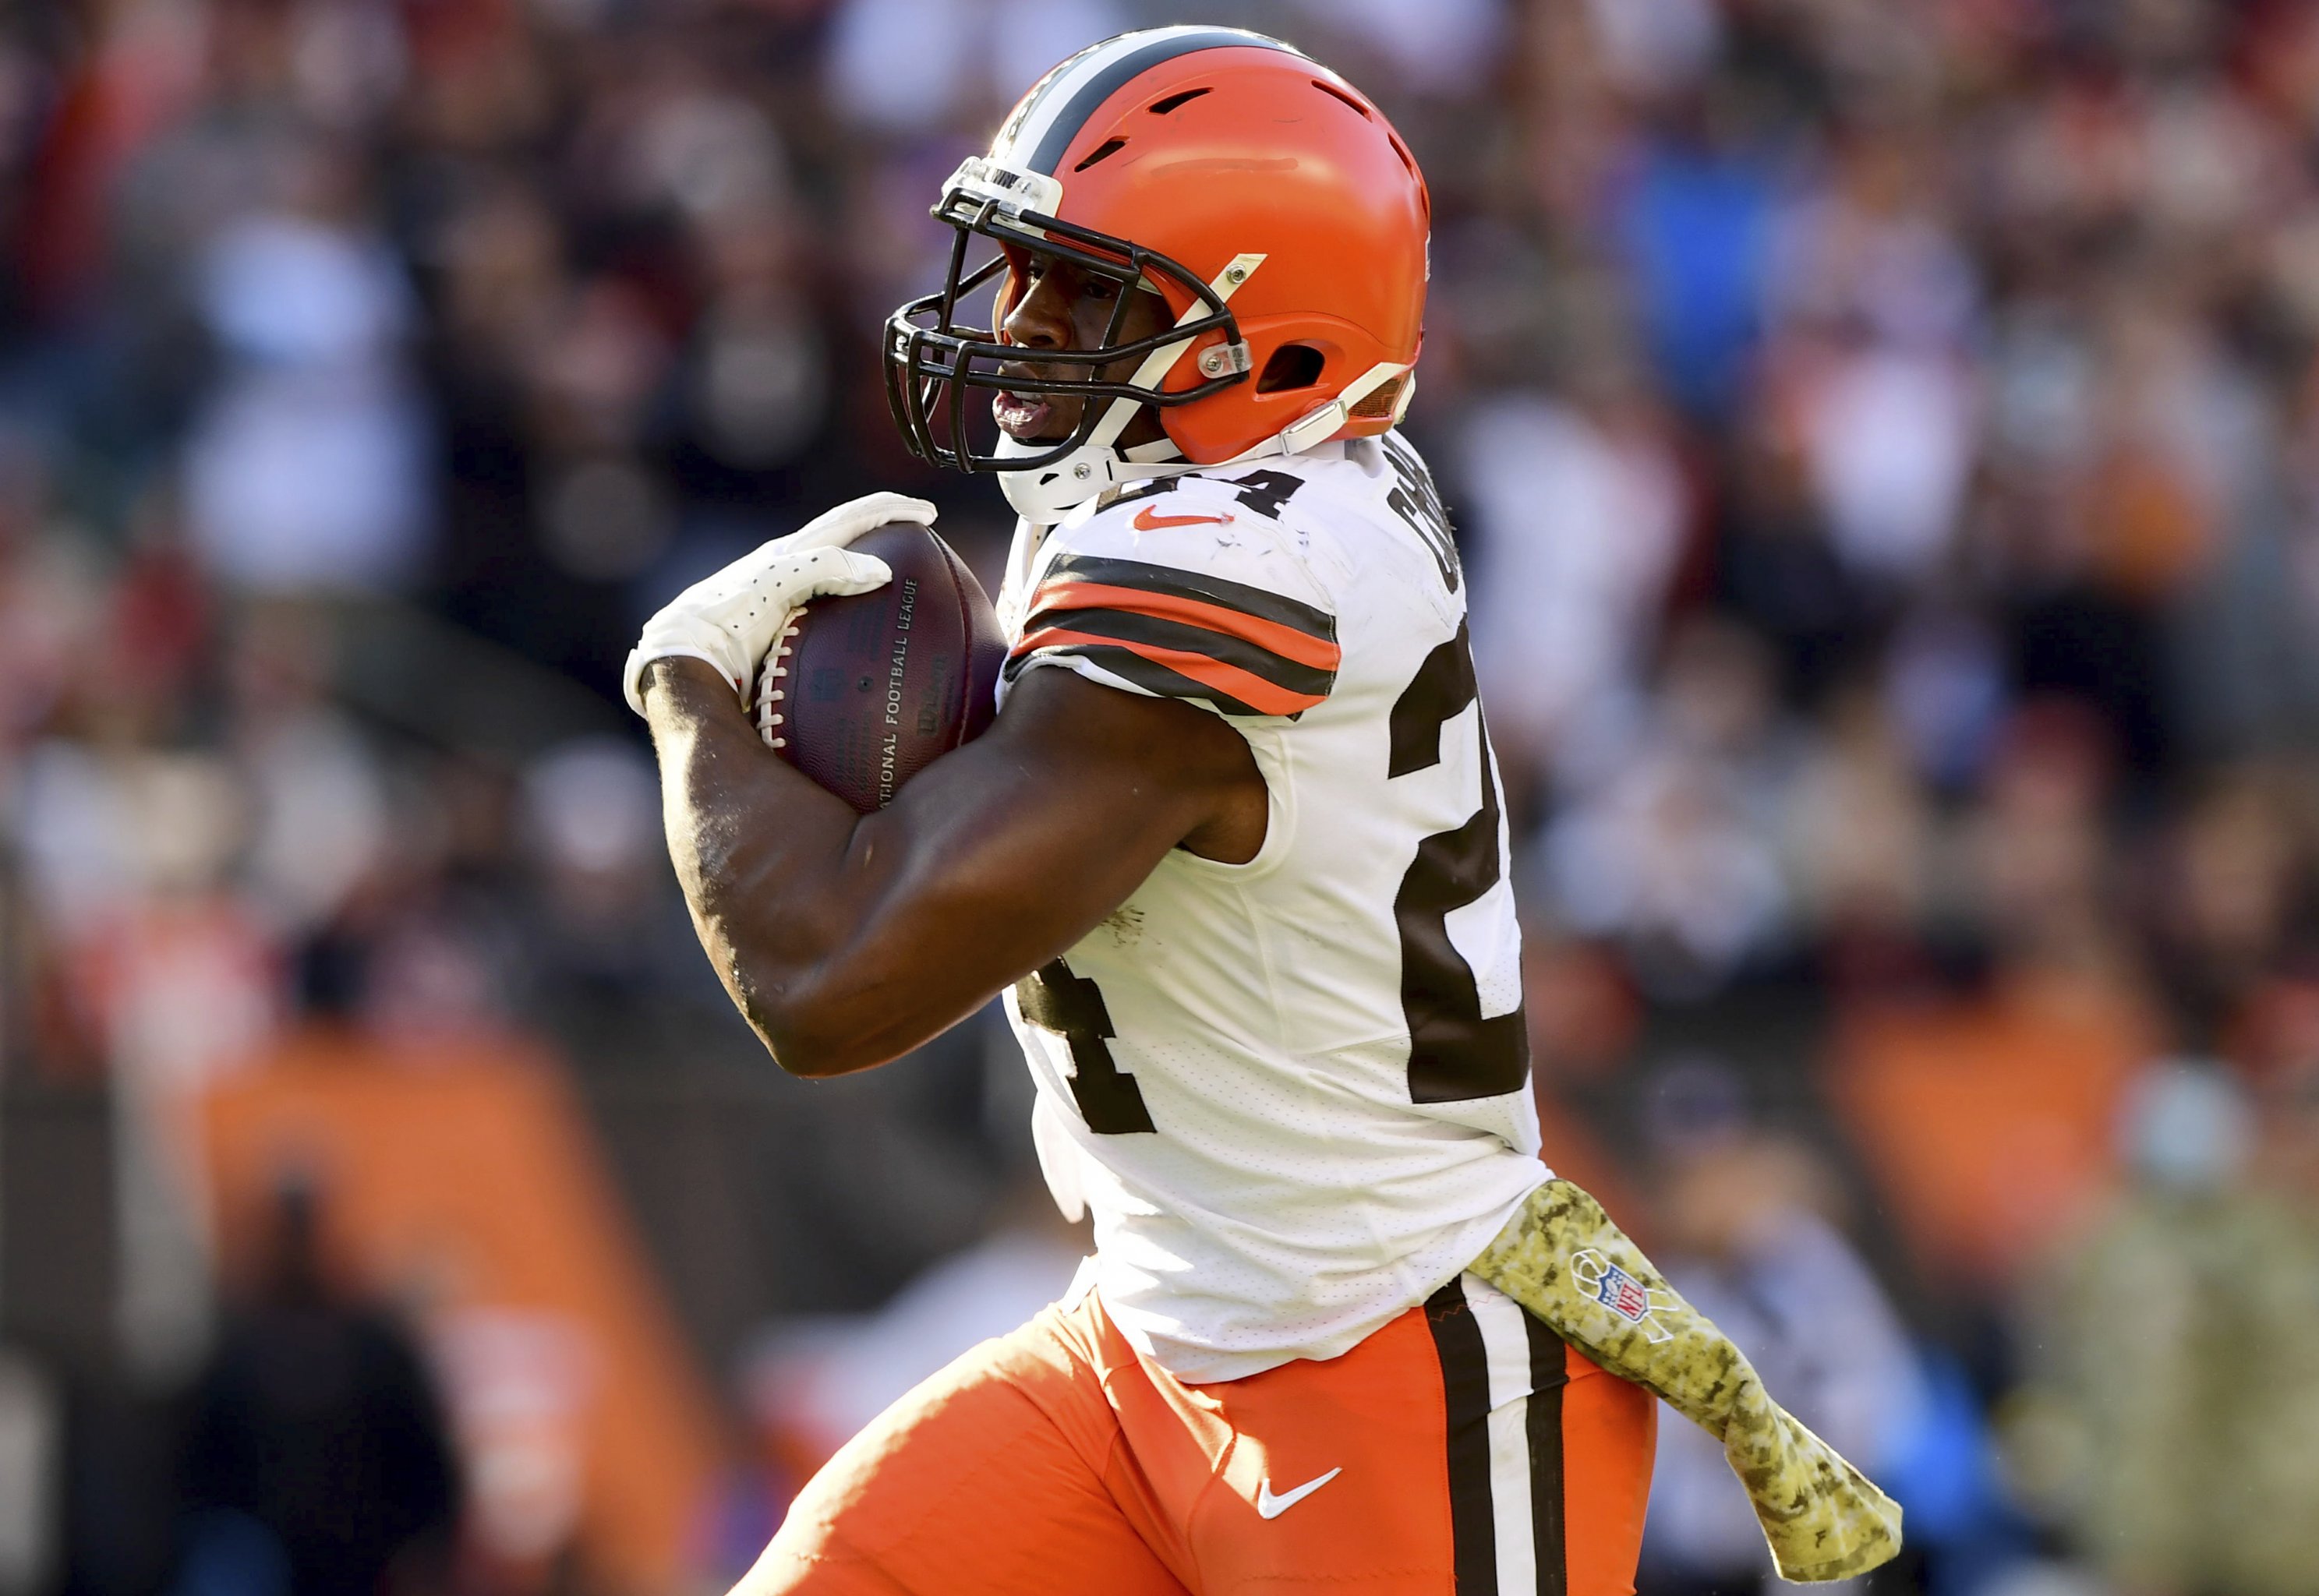 NFL playoff picture: What does Browns-Bengals mean for AFC playoff